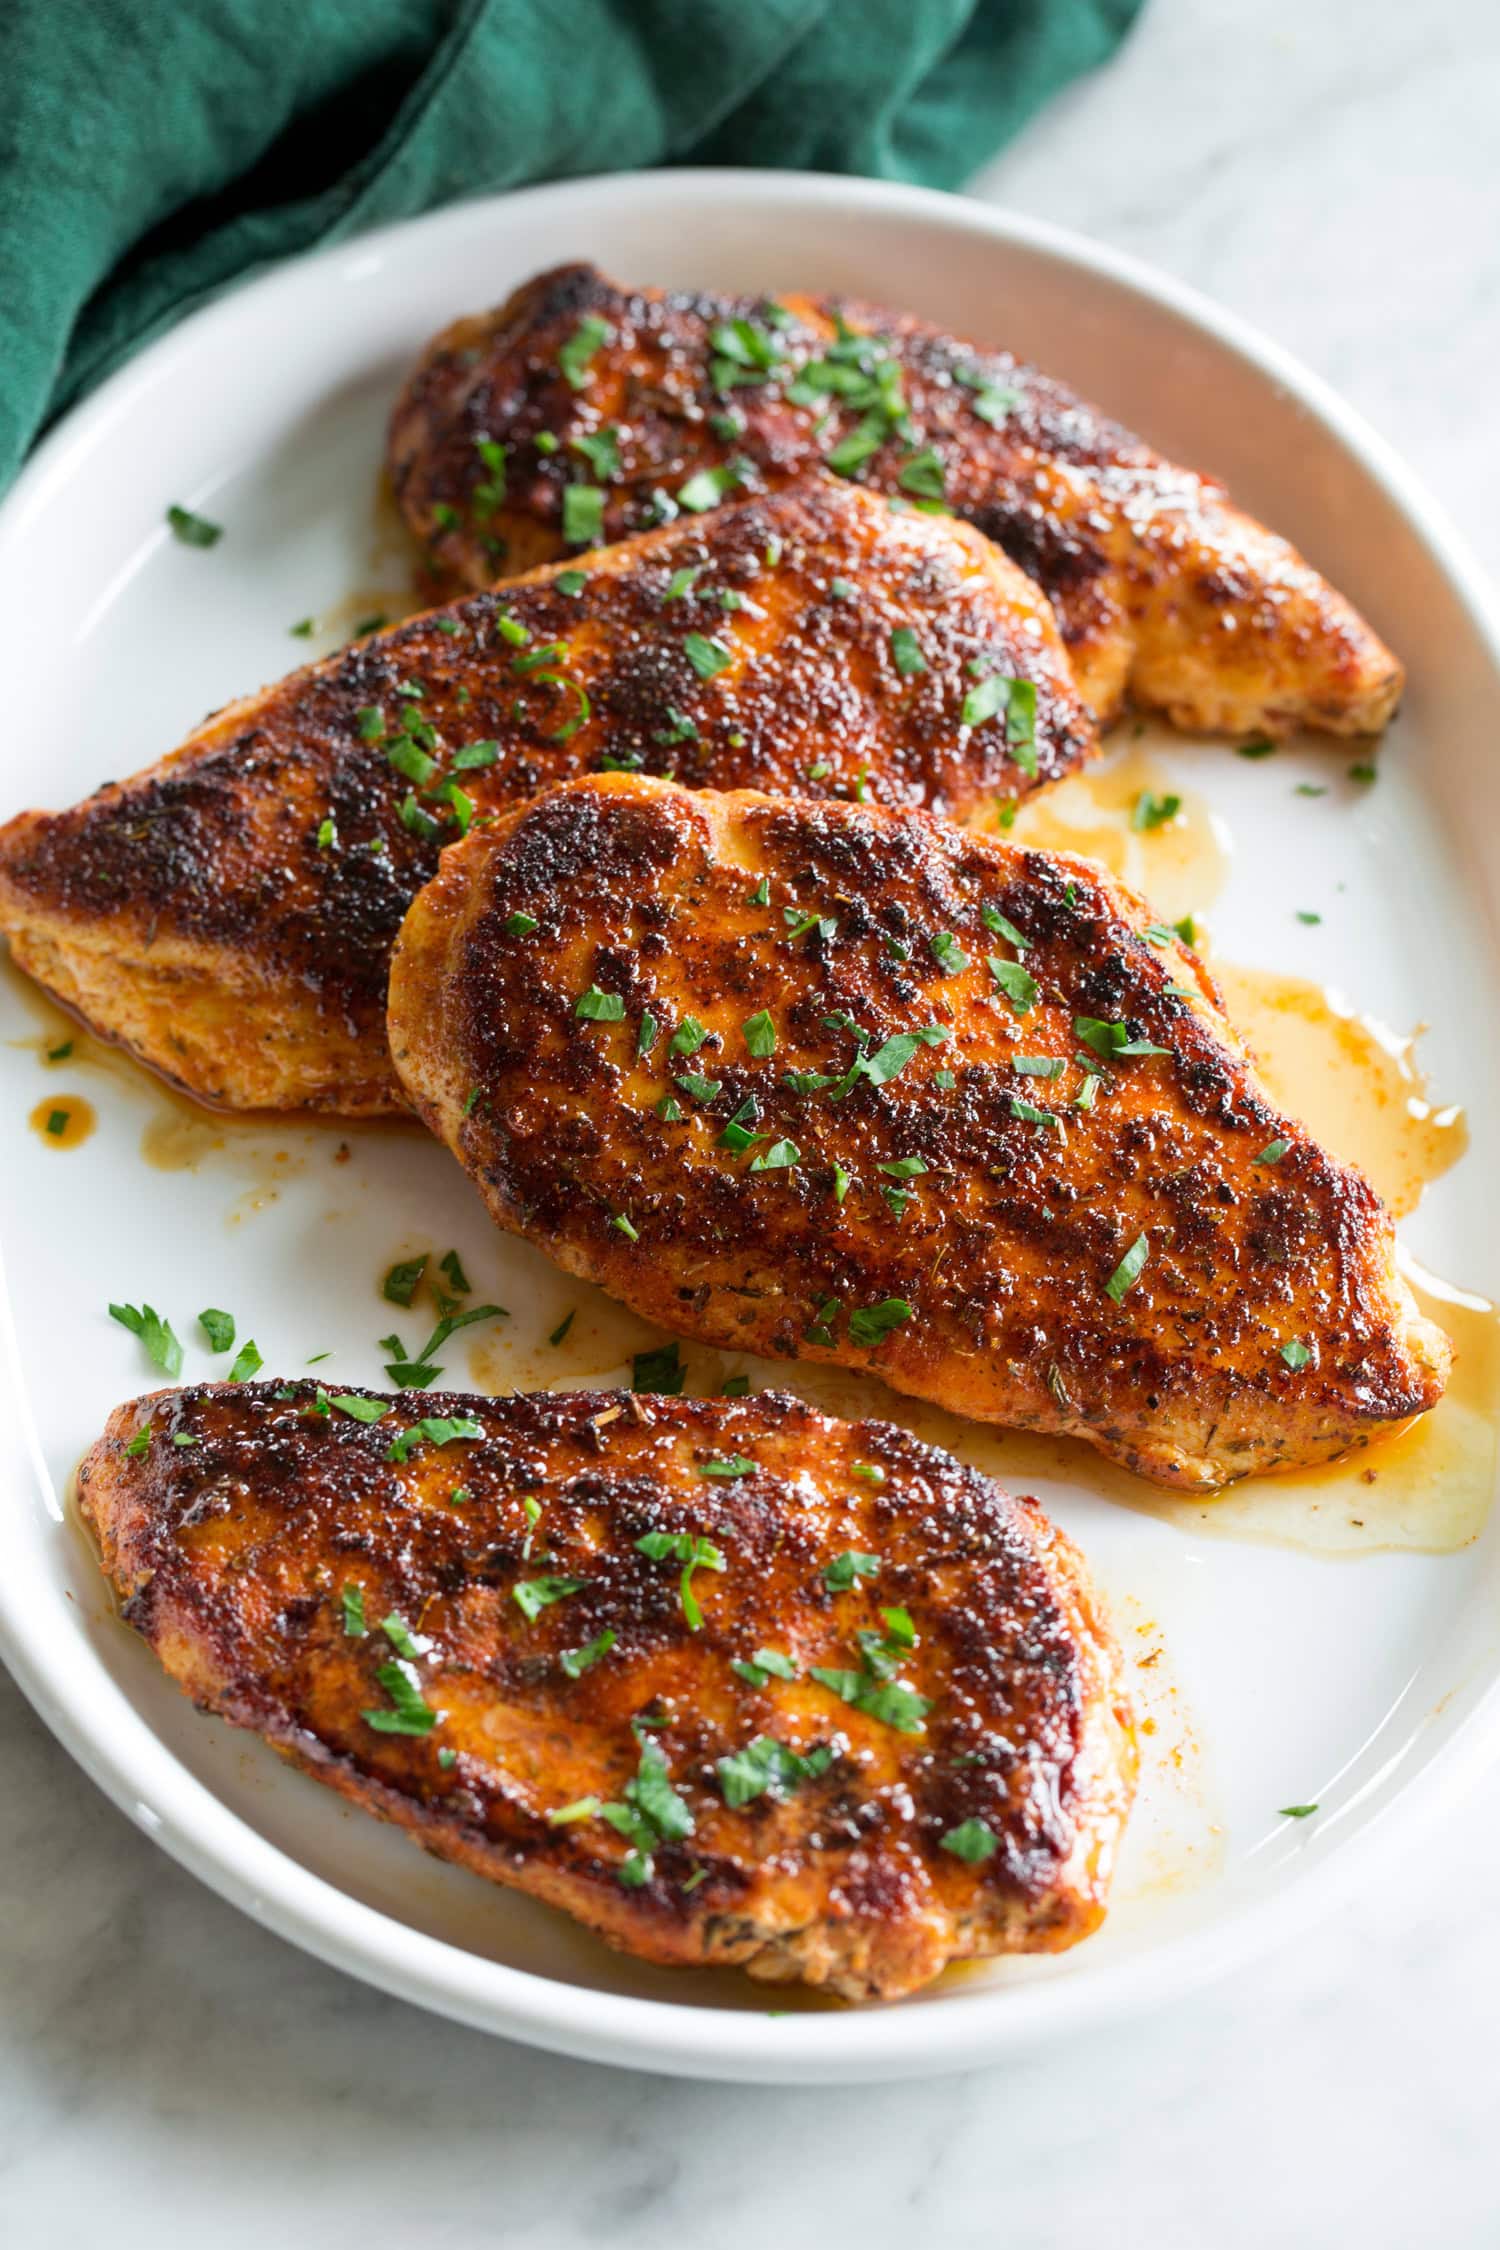 Blackened chicken breasts with butter and parsley garnish.